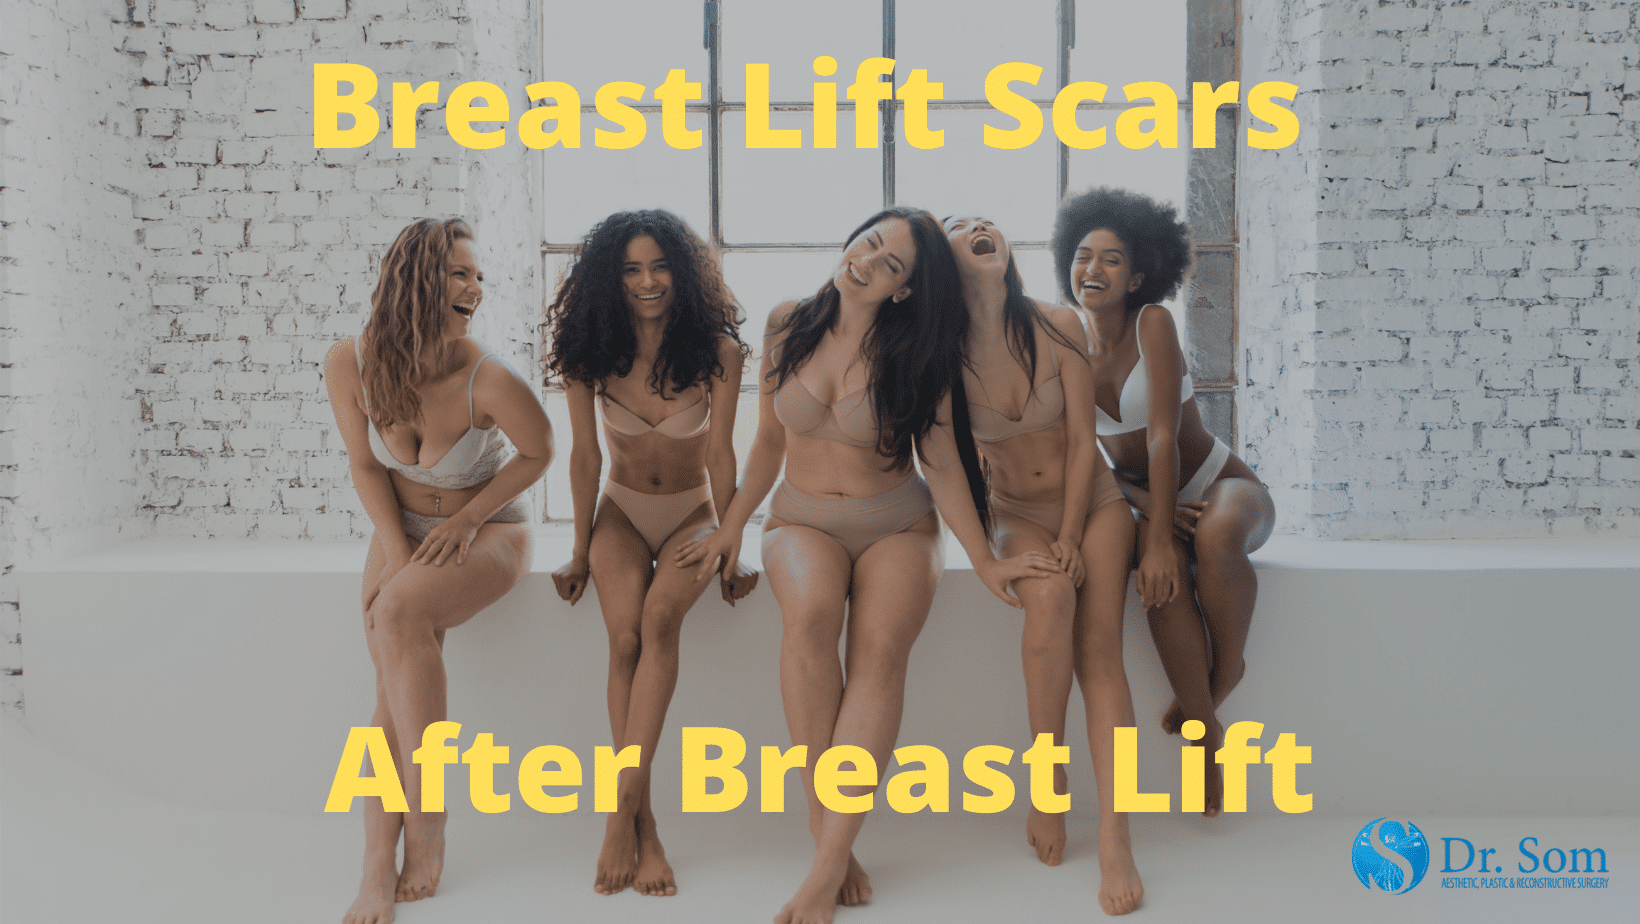 Breast surgery: What type of scar do I get with different breast